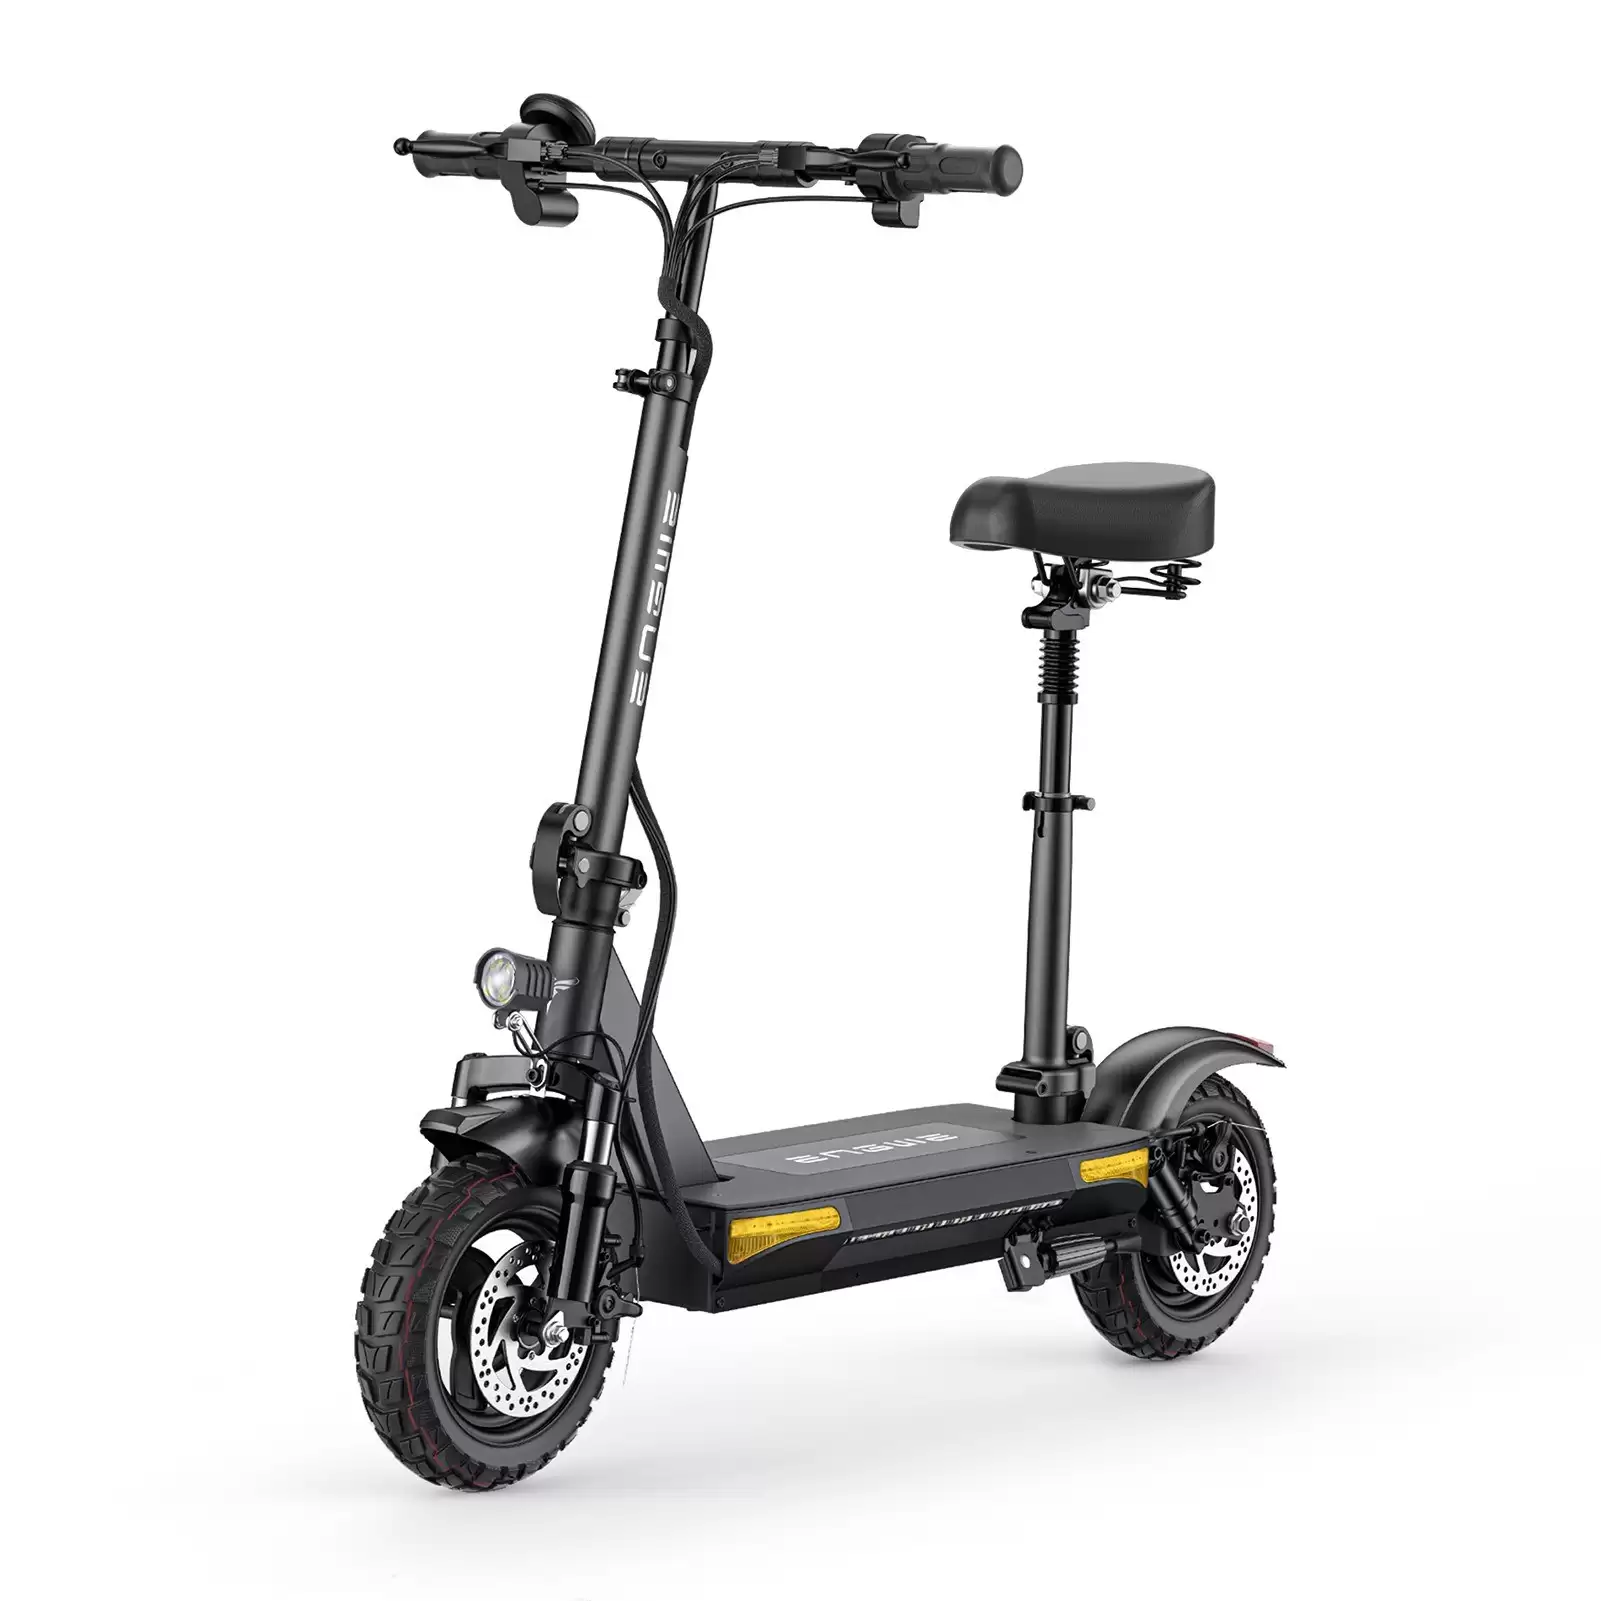 Get Extra 52% Off On Engwe S6 Folding Electric Scooter With Seat 10 Inch Off-Road Tire Tubeless Wheels 500w (Peak 700w) Brushless Motor 48v 15.6ah Battery 264lb Max Payload At Tomtop